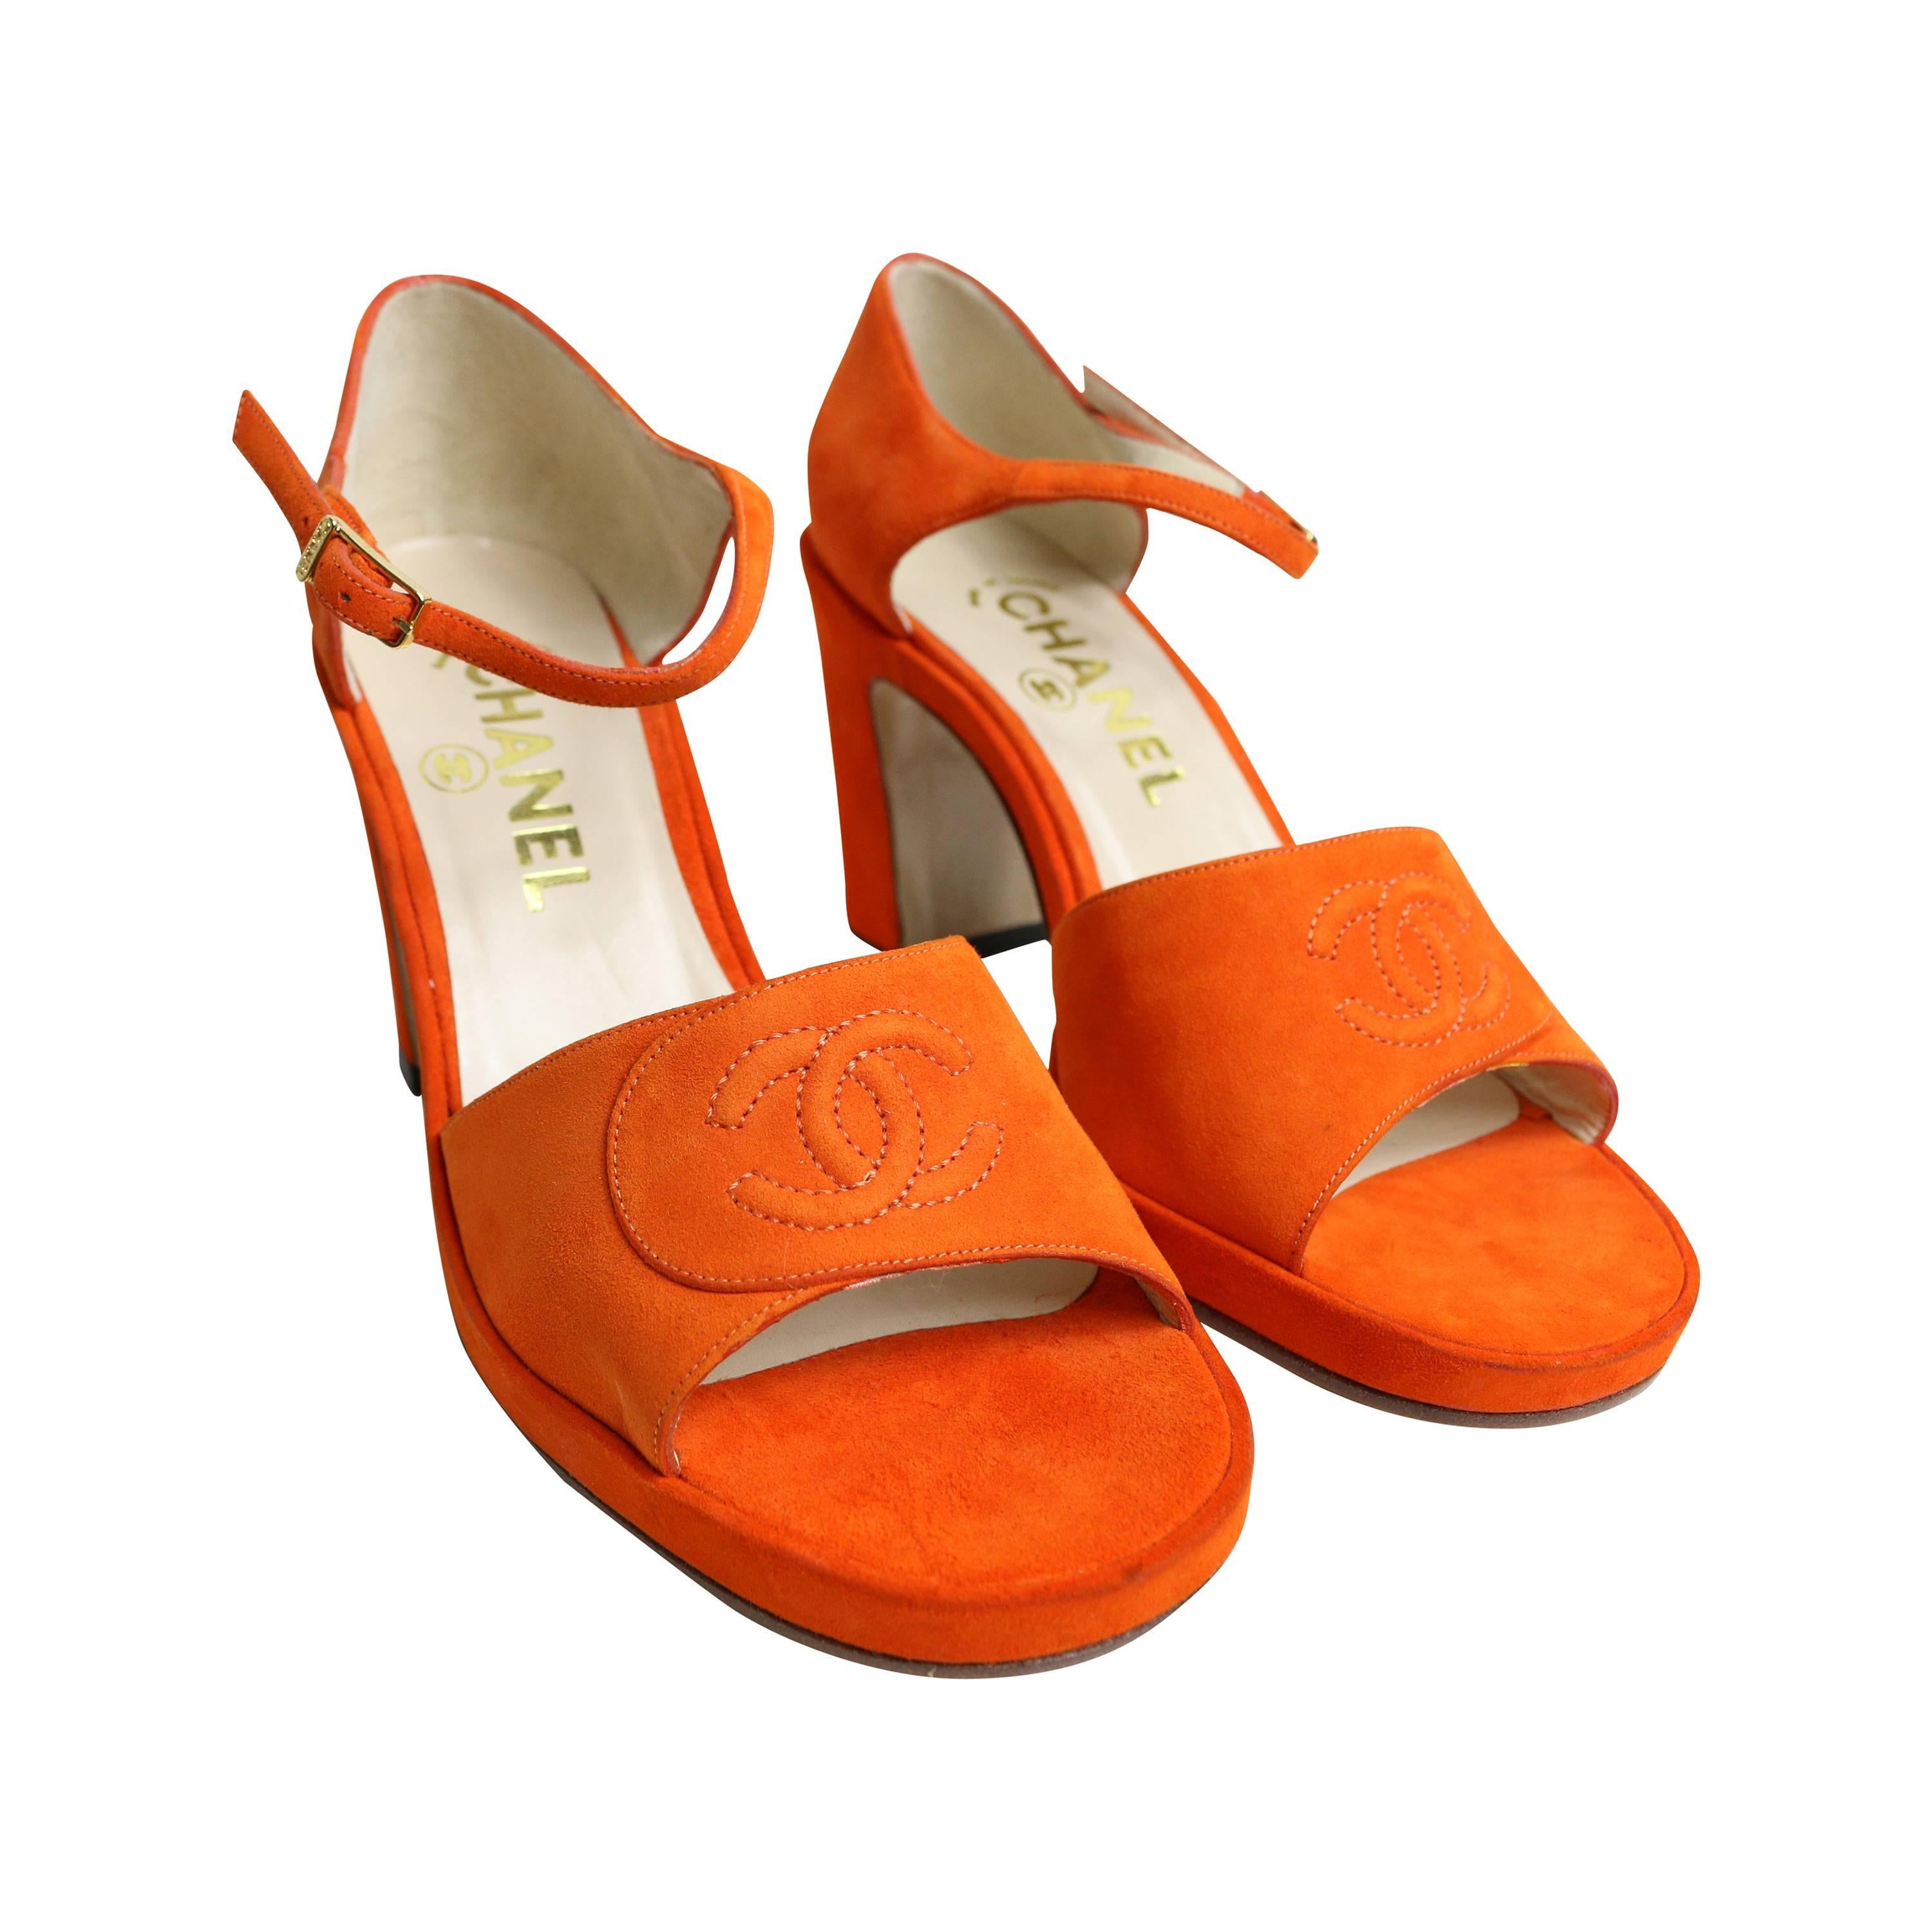 - Vintage 90s Chanel orange suede embroidered CC open toe strap heels.

- Featuring a 